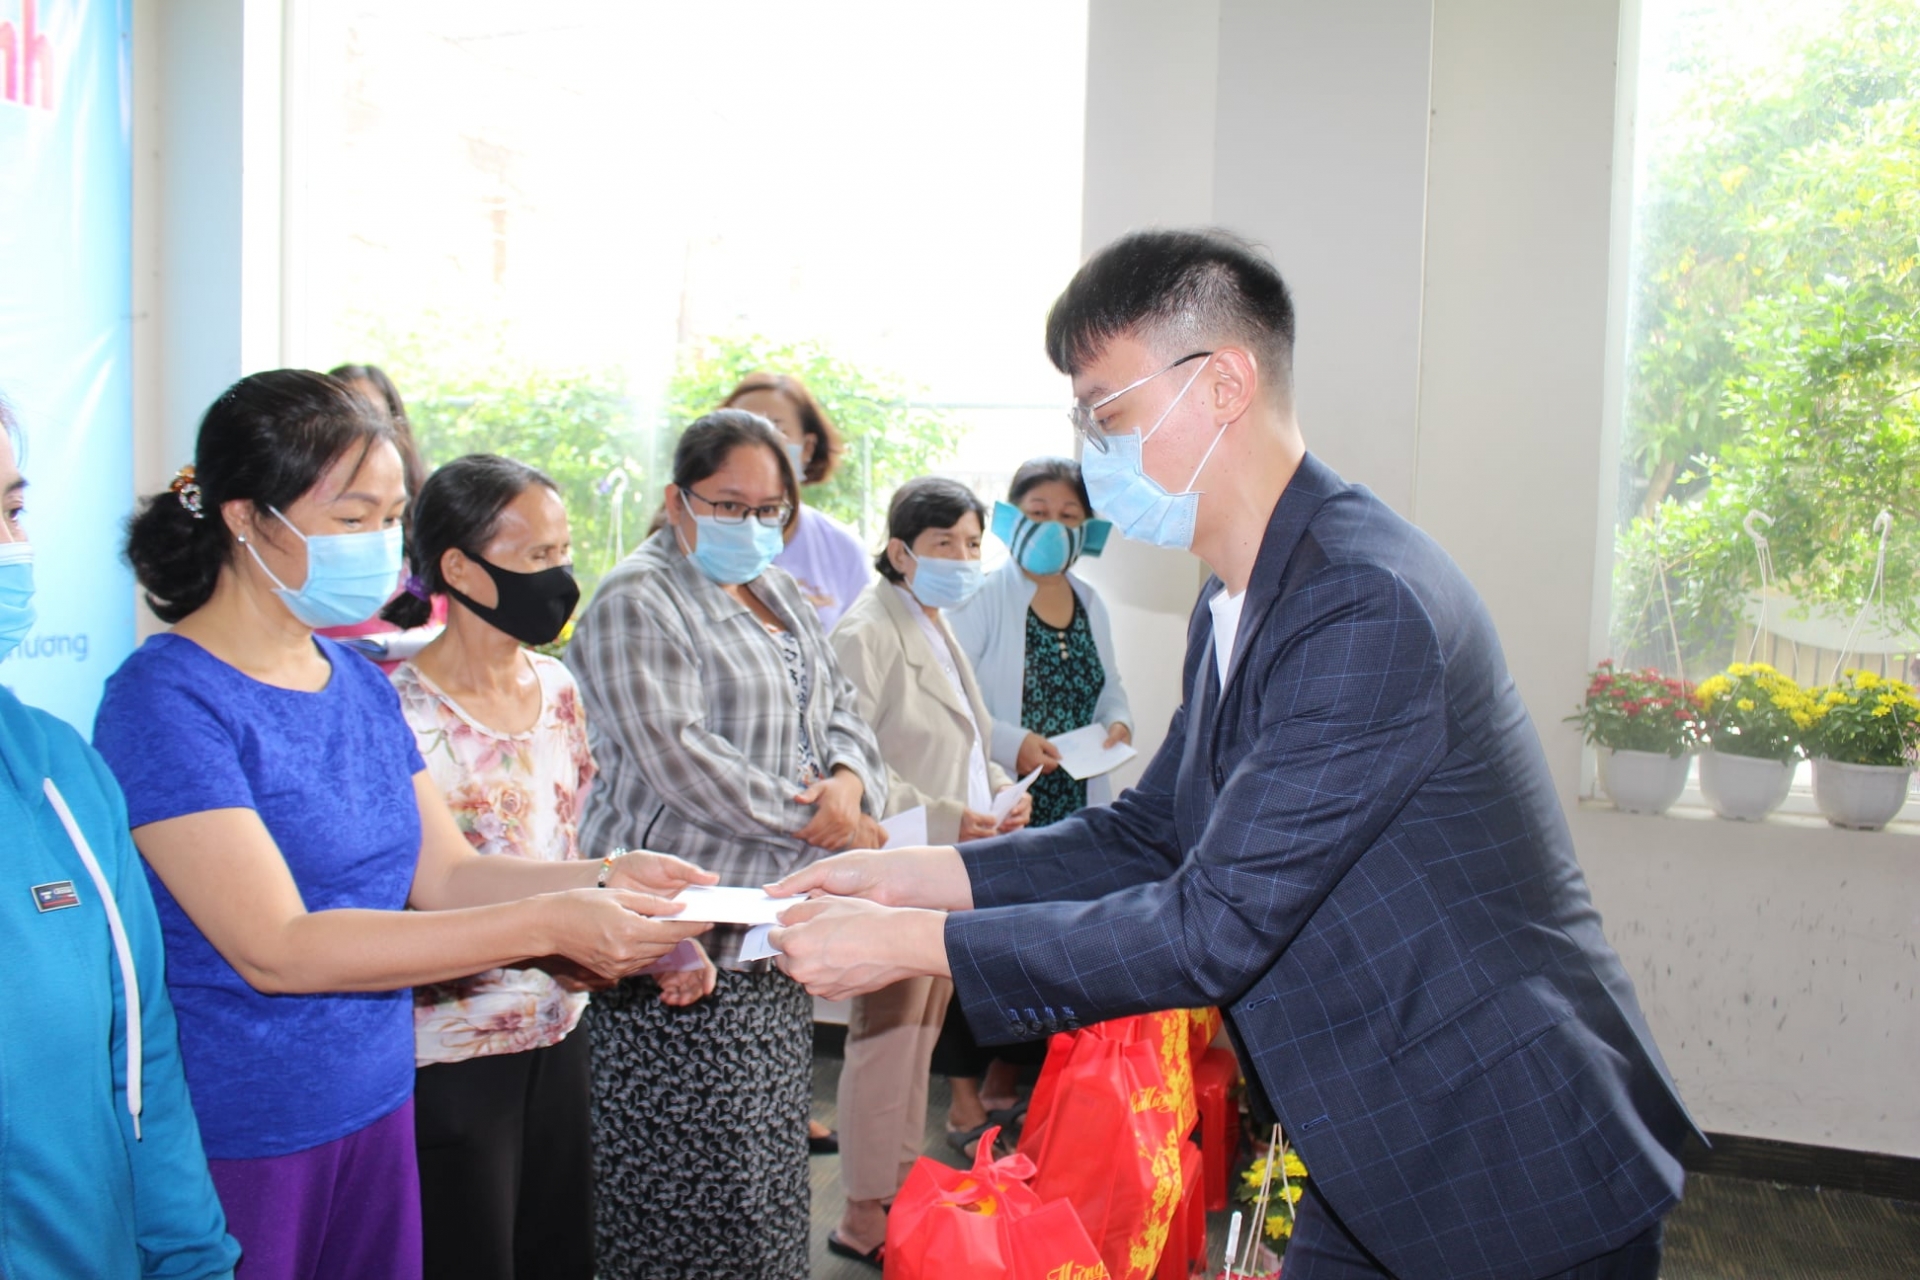 Lunar new year gifts presented to disadvantaged households in hcm city